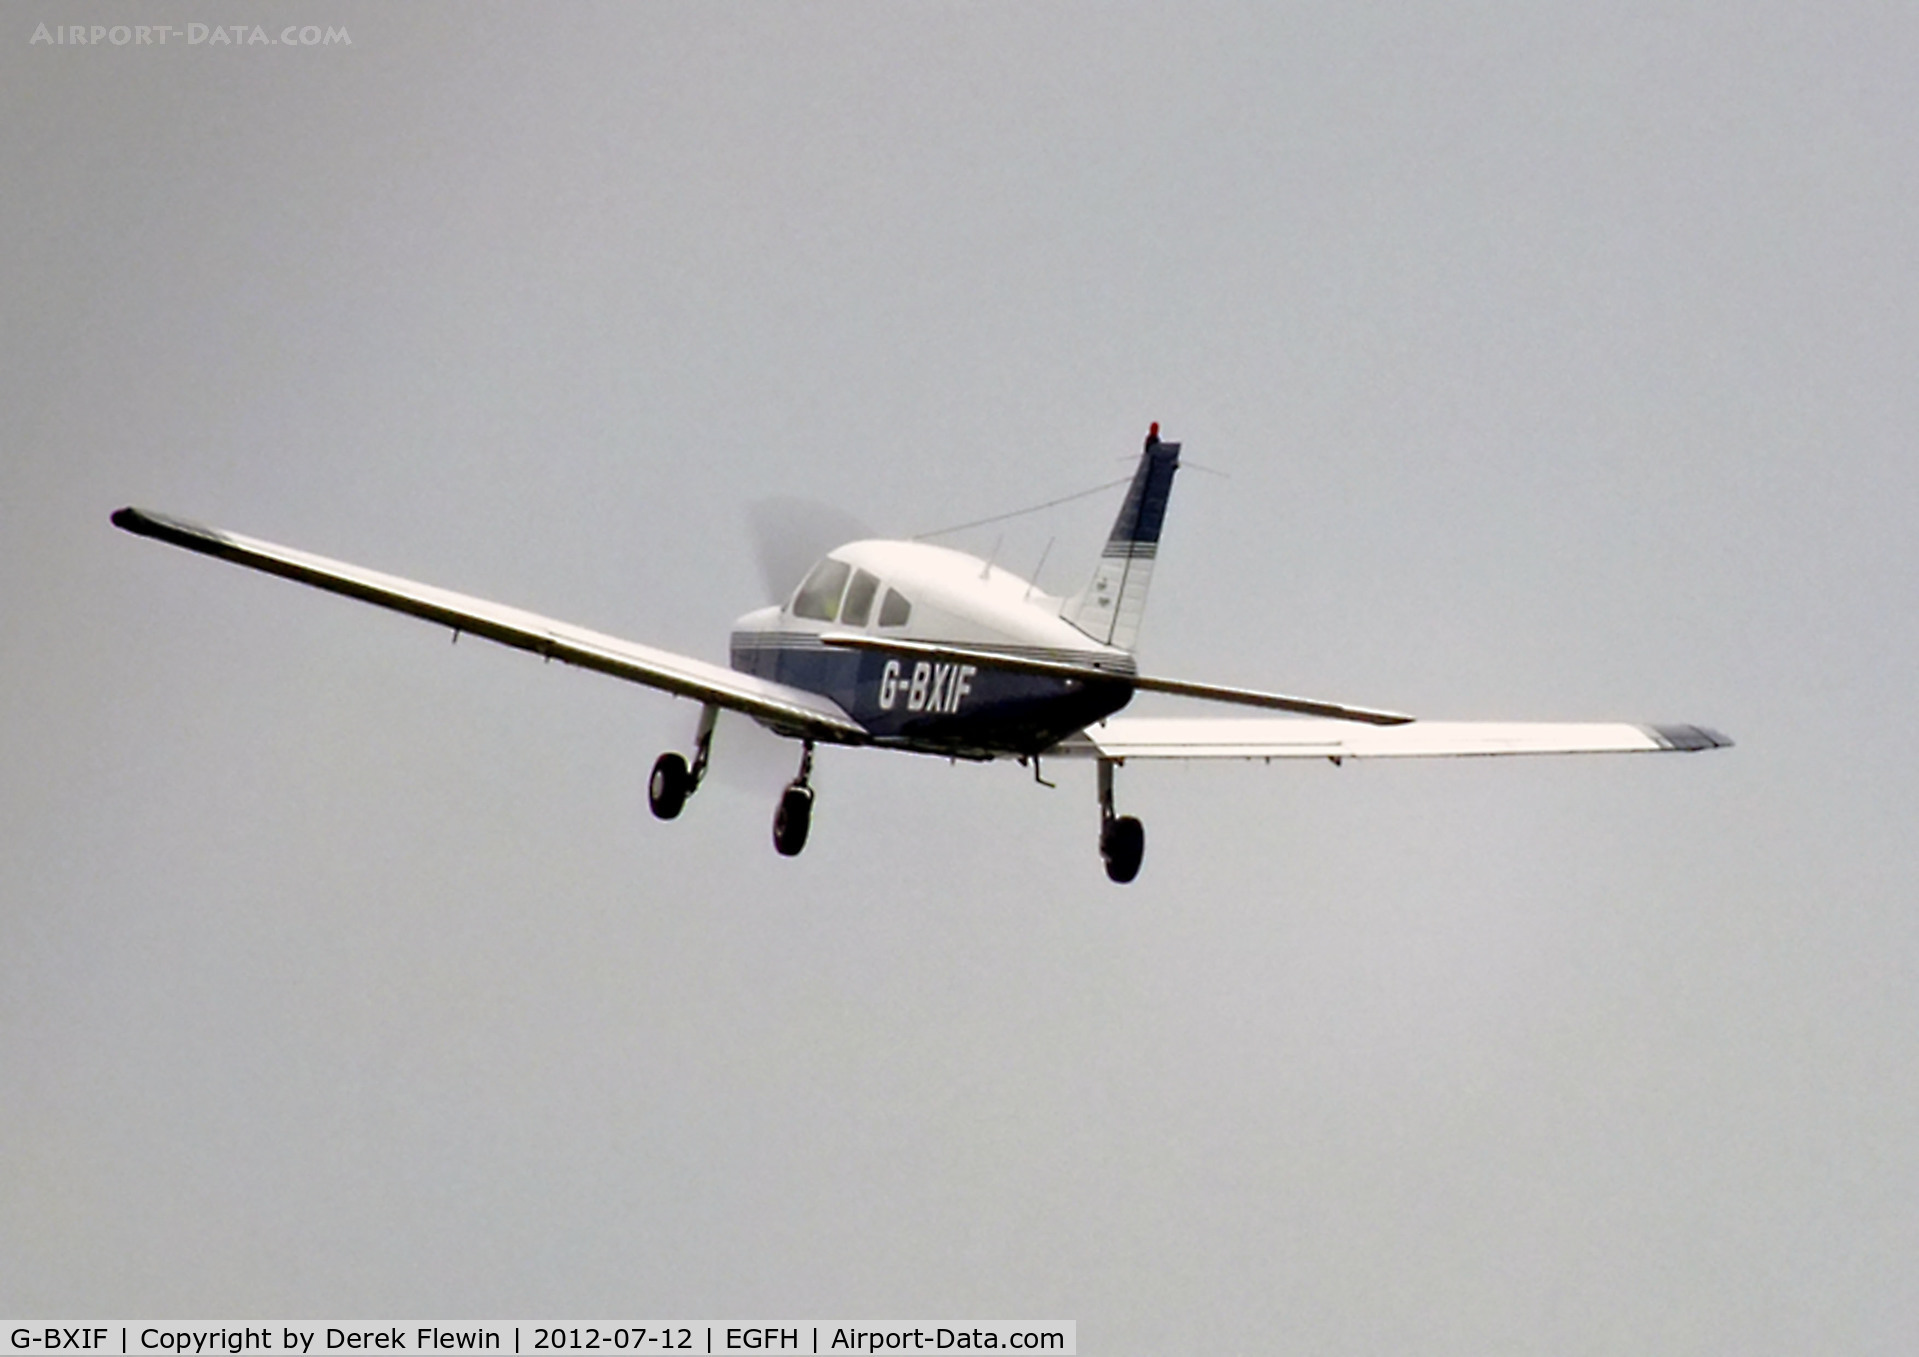 G-BXIF, 1976 Piper PA-28-181 Cherokee Archer II C/N 28-7690404, Climbing out from EGFH en route to EGFF.